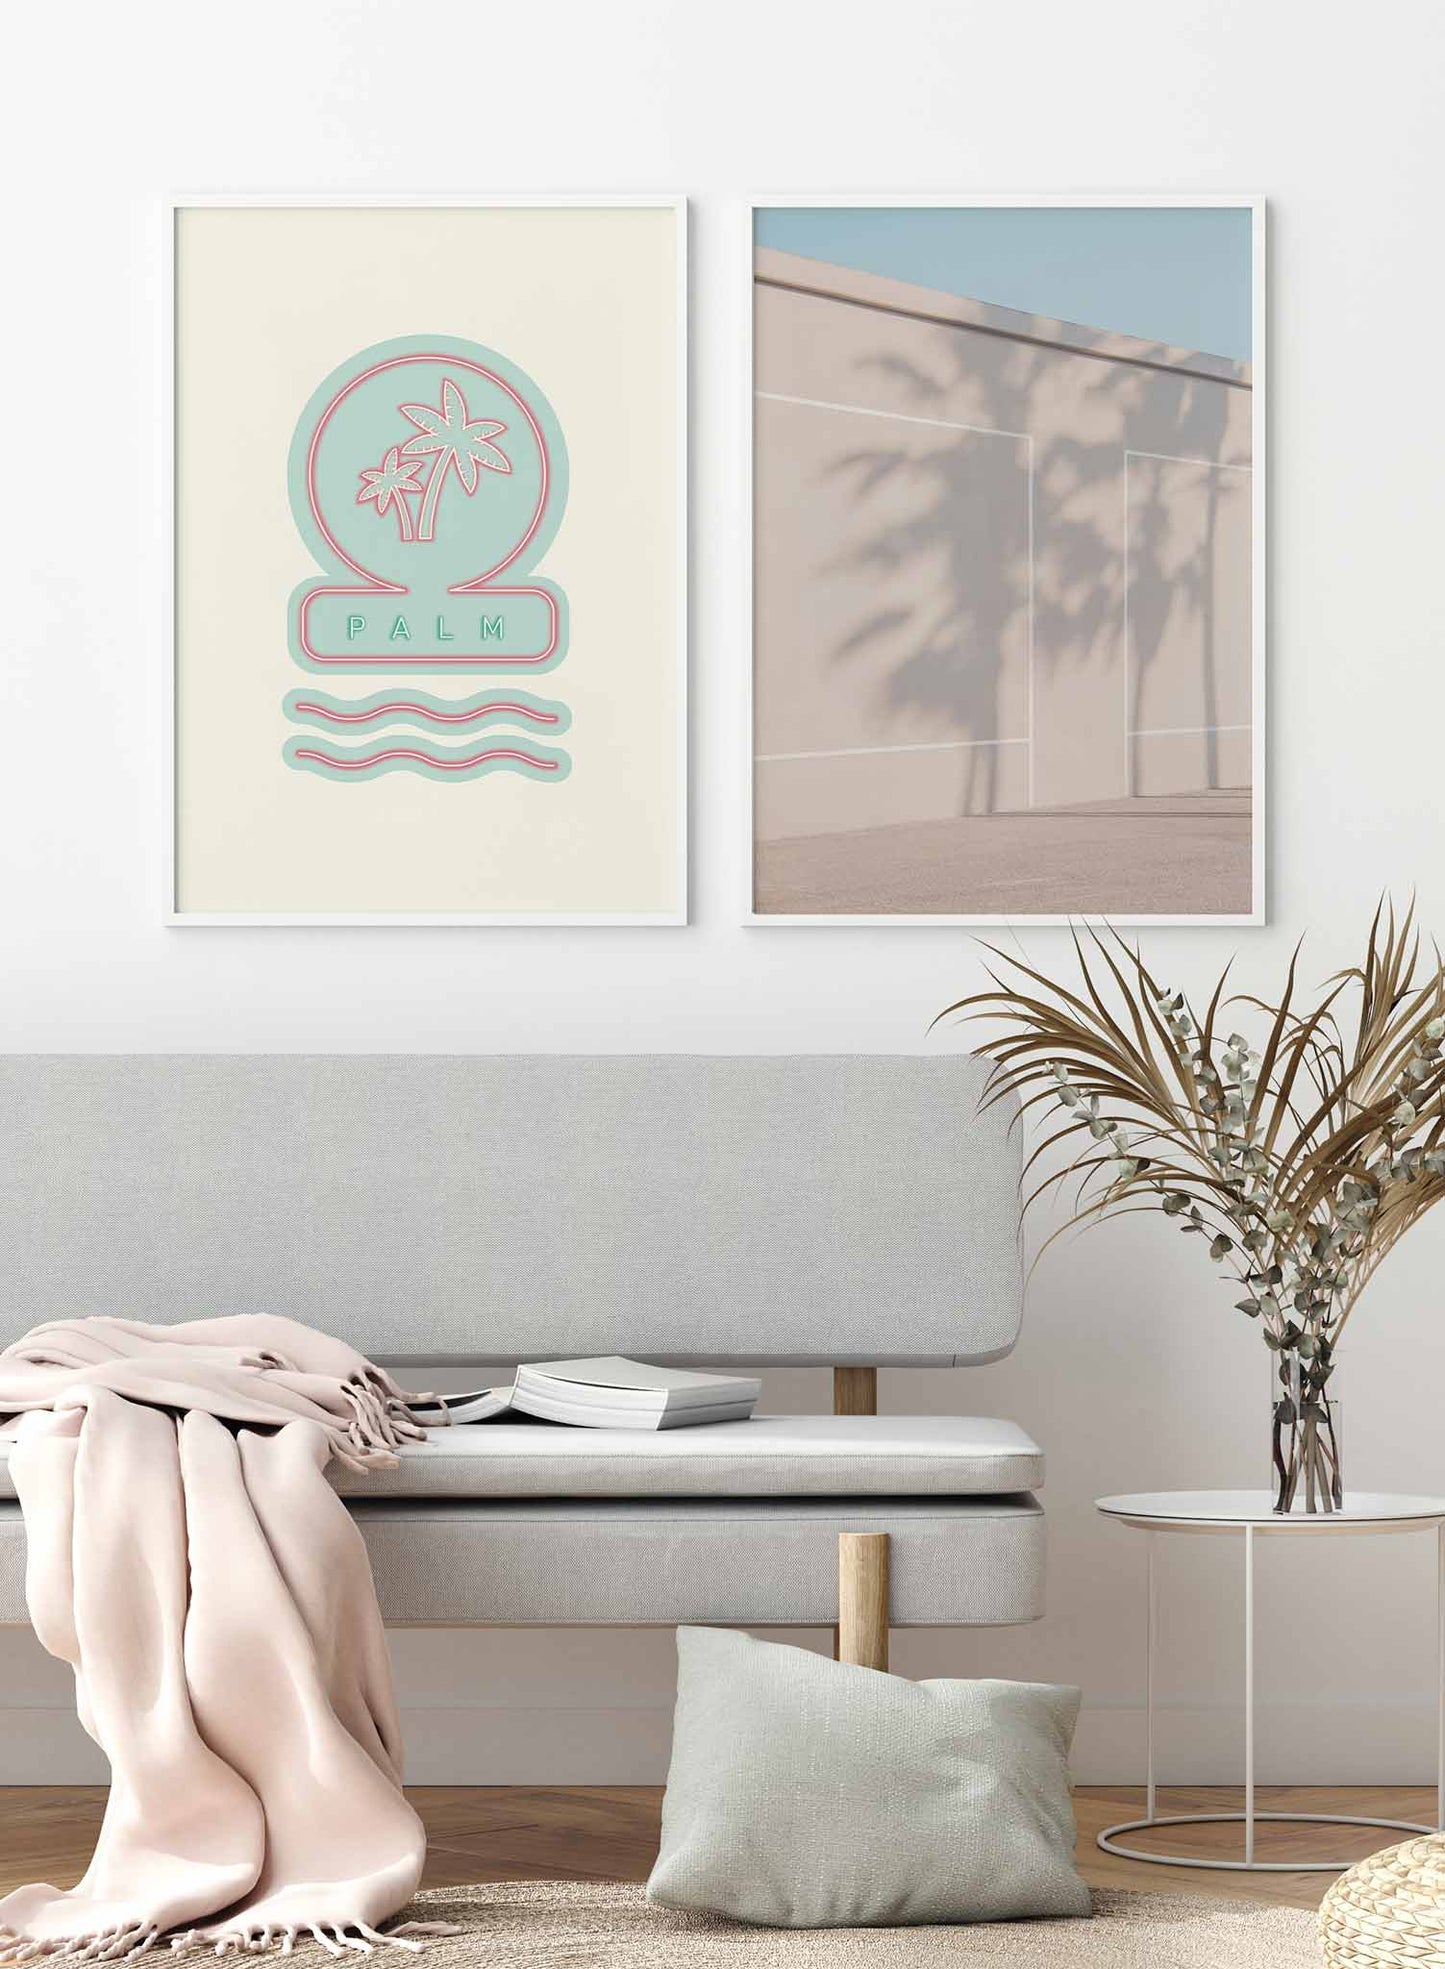 Neon Palms is a minimalist illustration poster of an aqua blue sign by Opposite Wall.